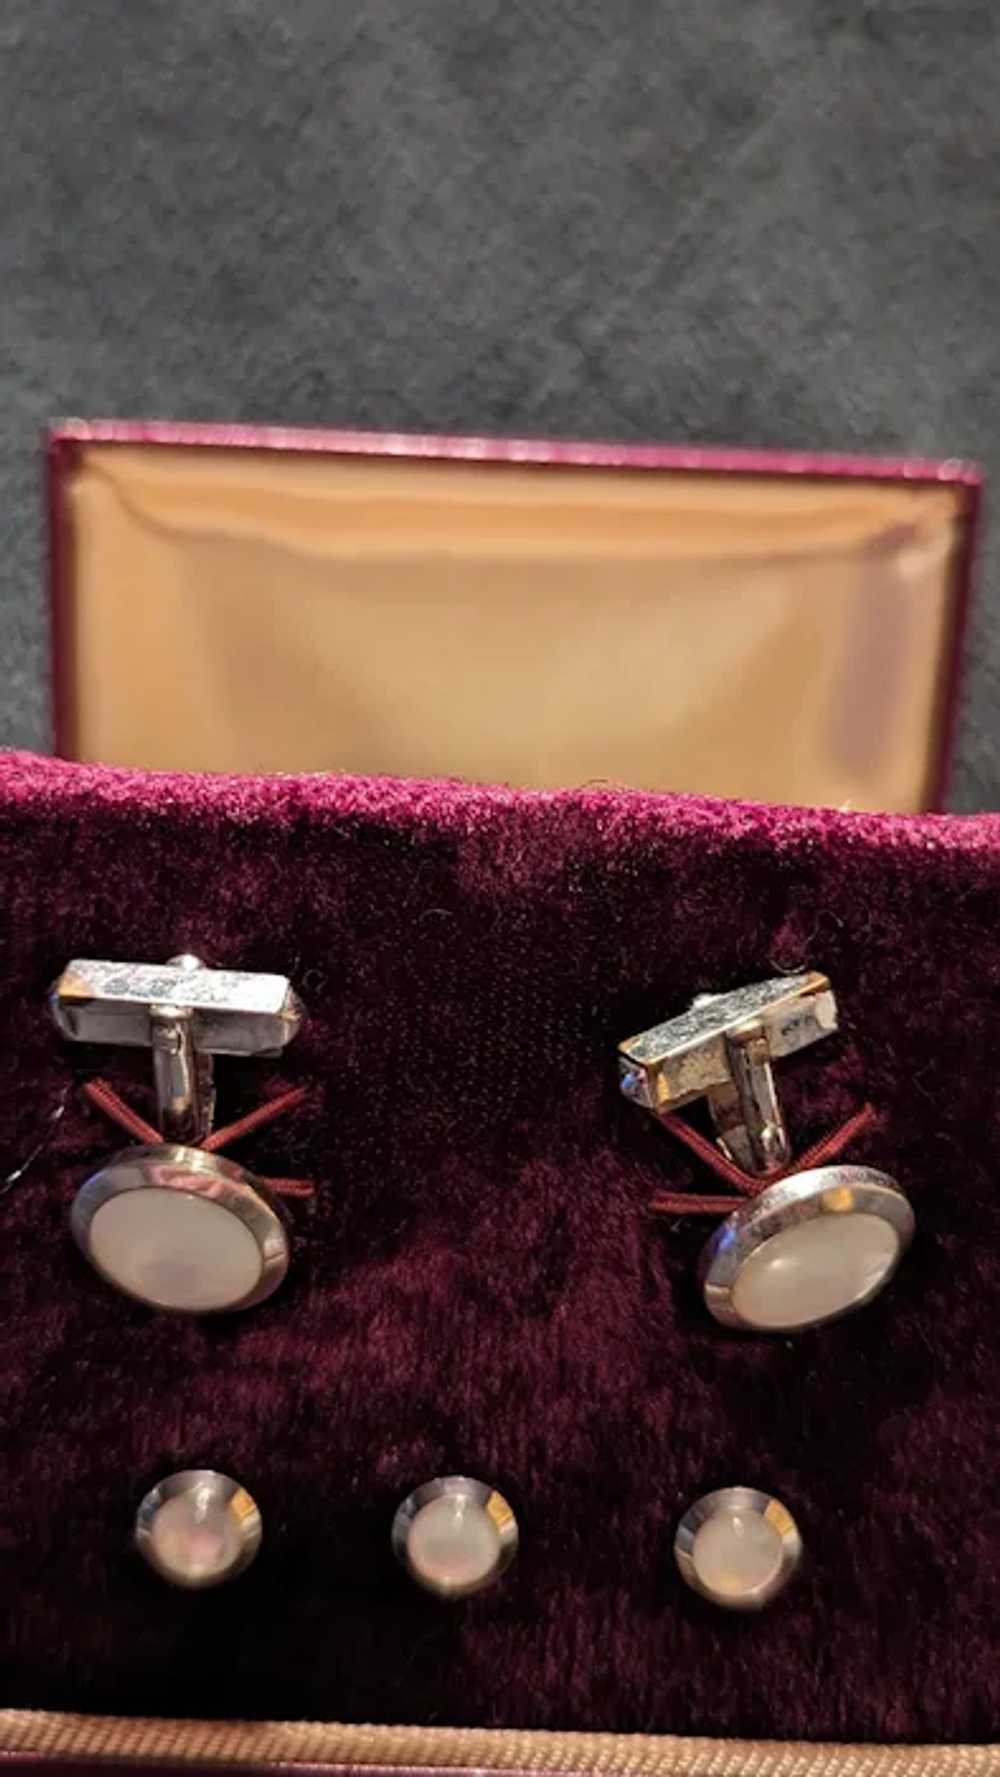 Swank Mother of Pearl Cuff Links and Stud Set - image 2